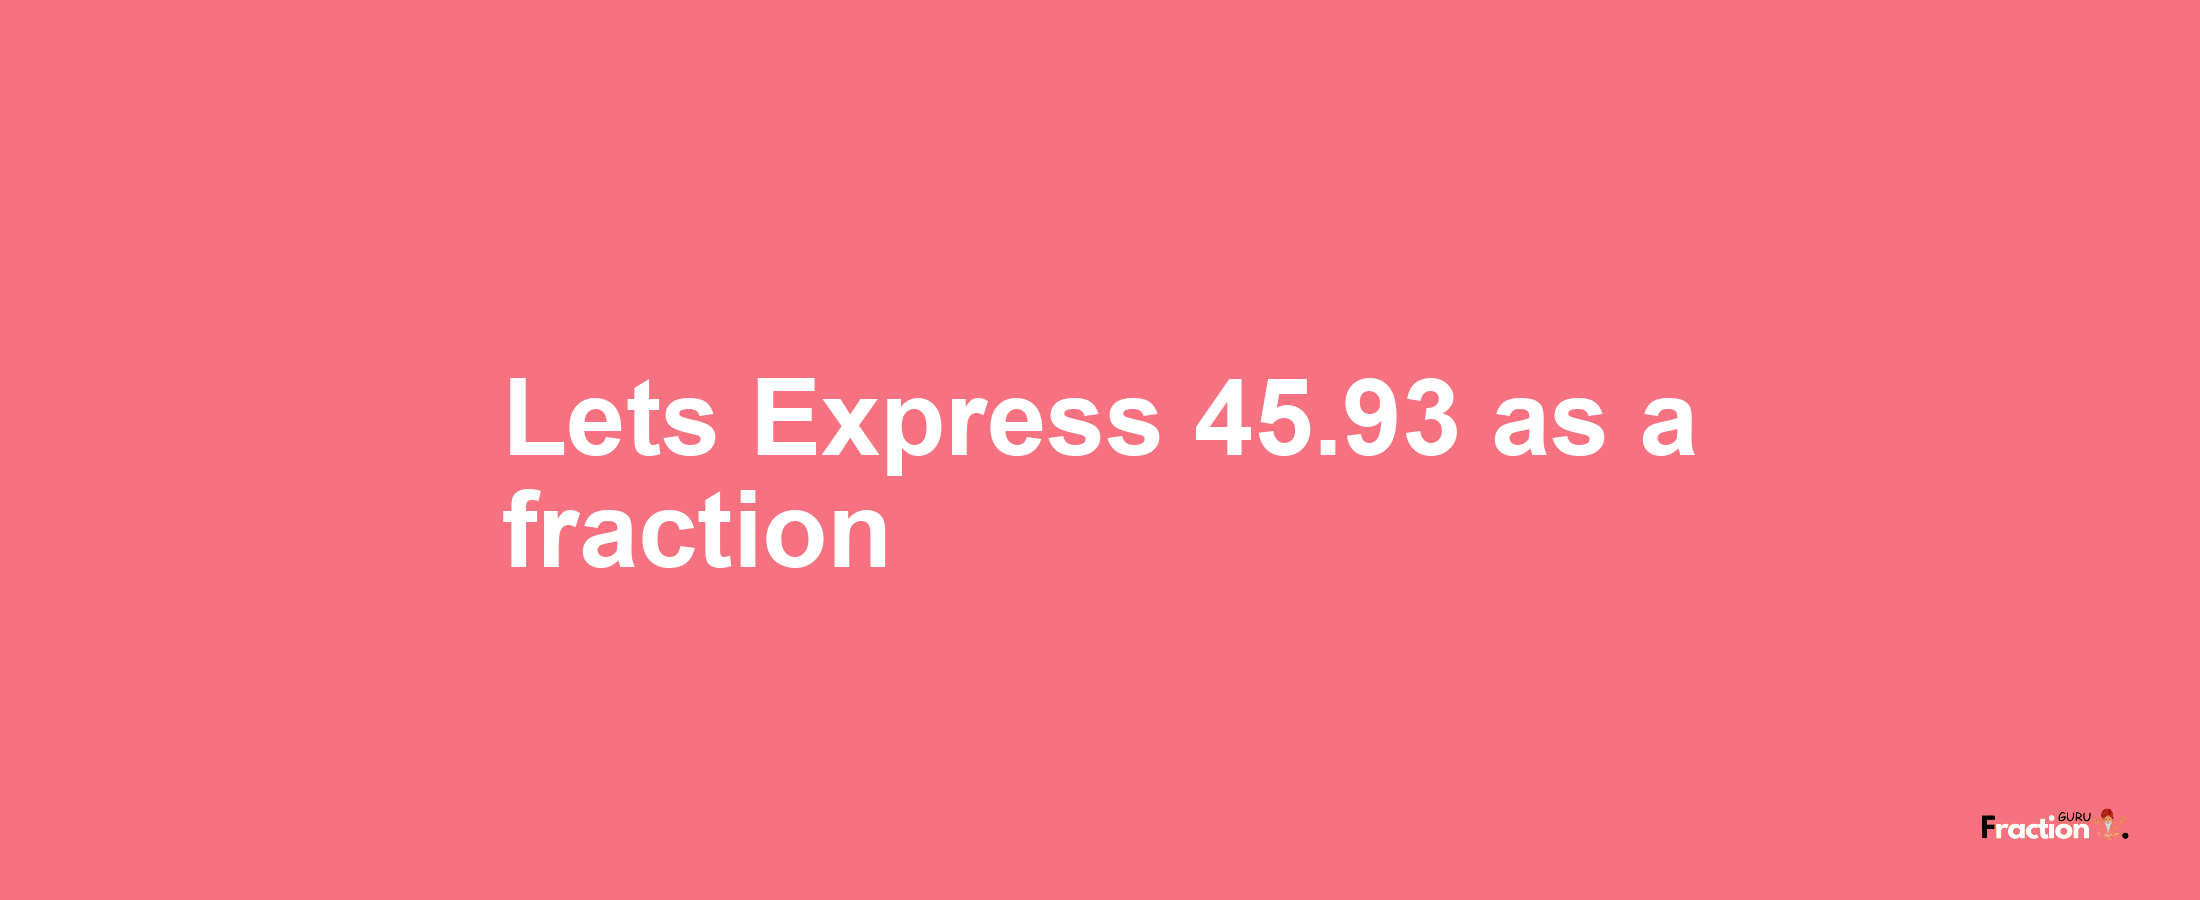 Lets Express 45.93 as afraction